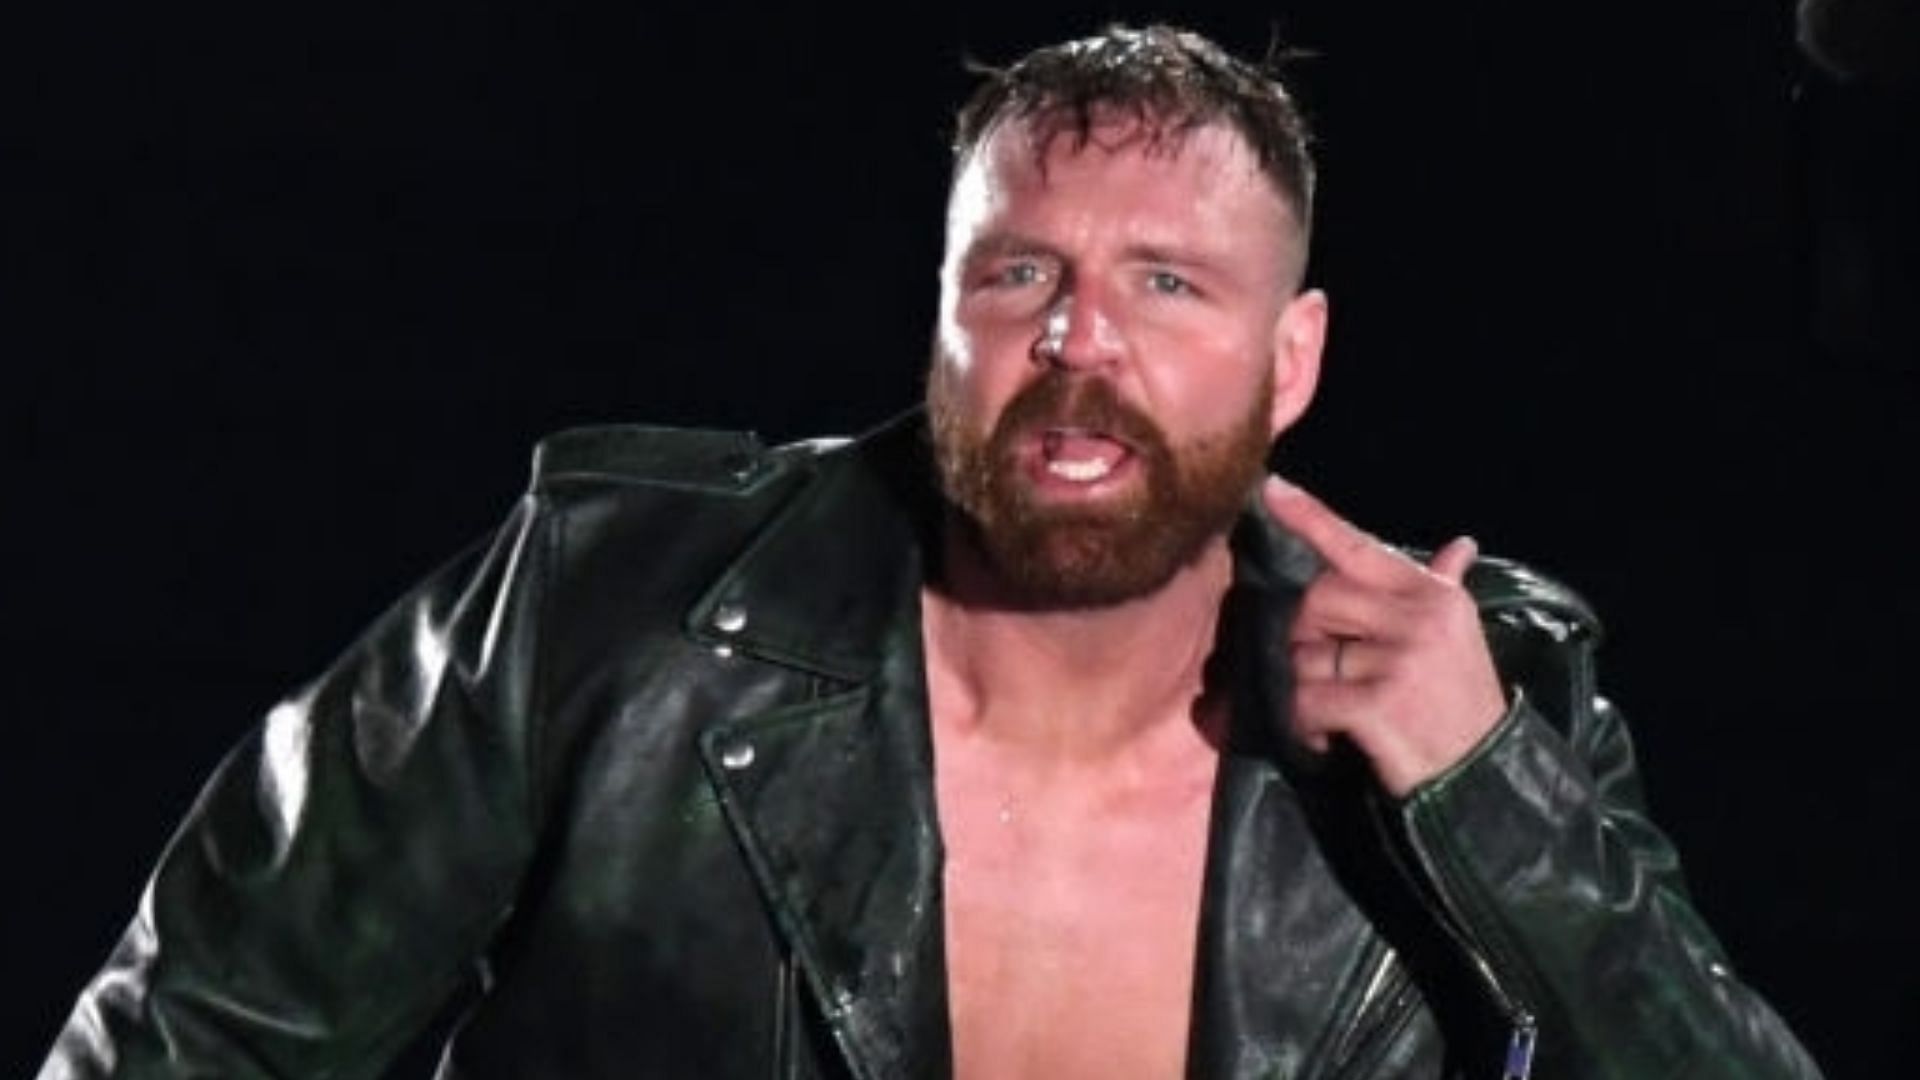 Jon Moxley making his entrance at an NJPW event